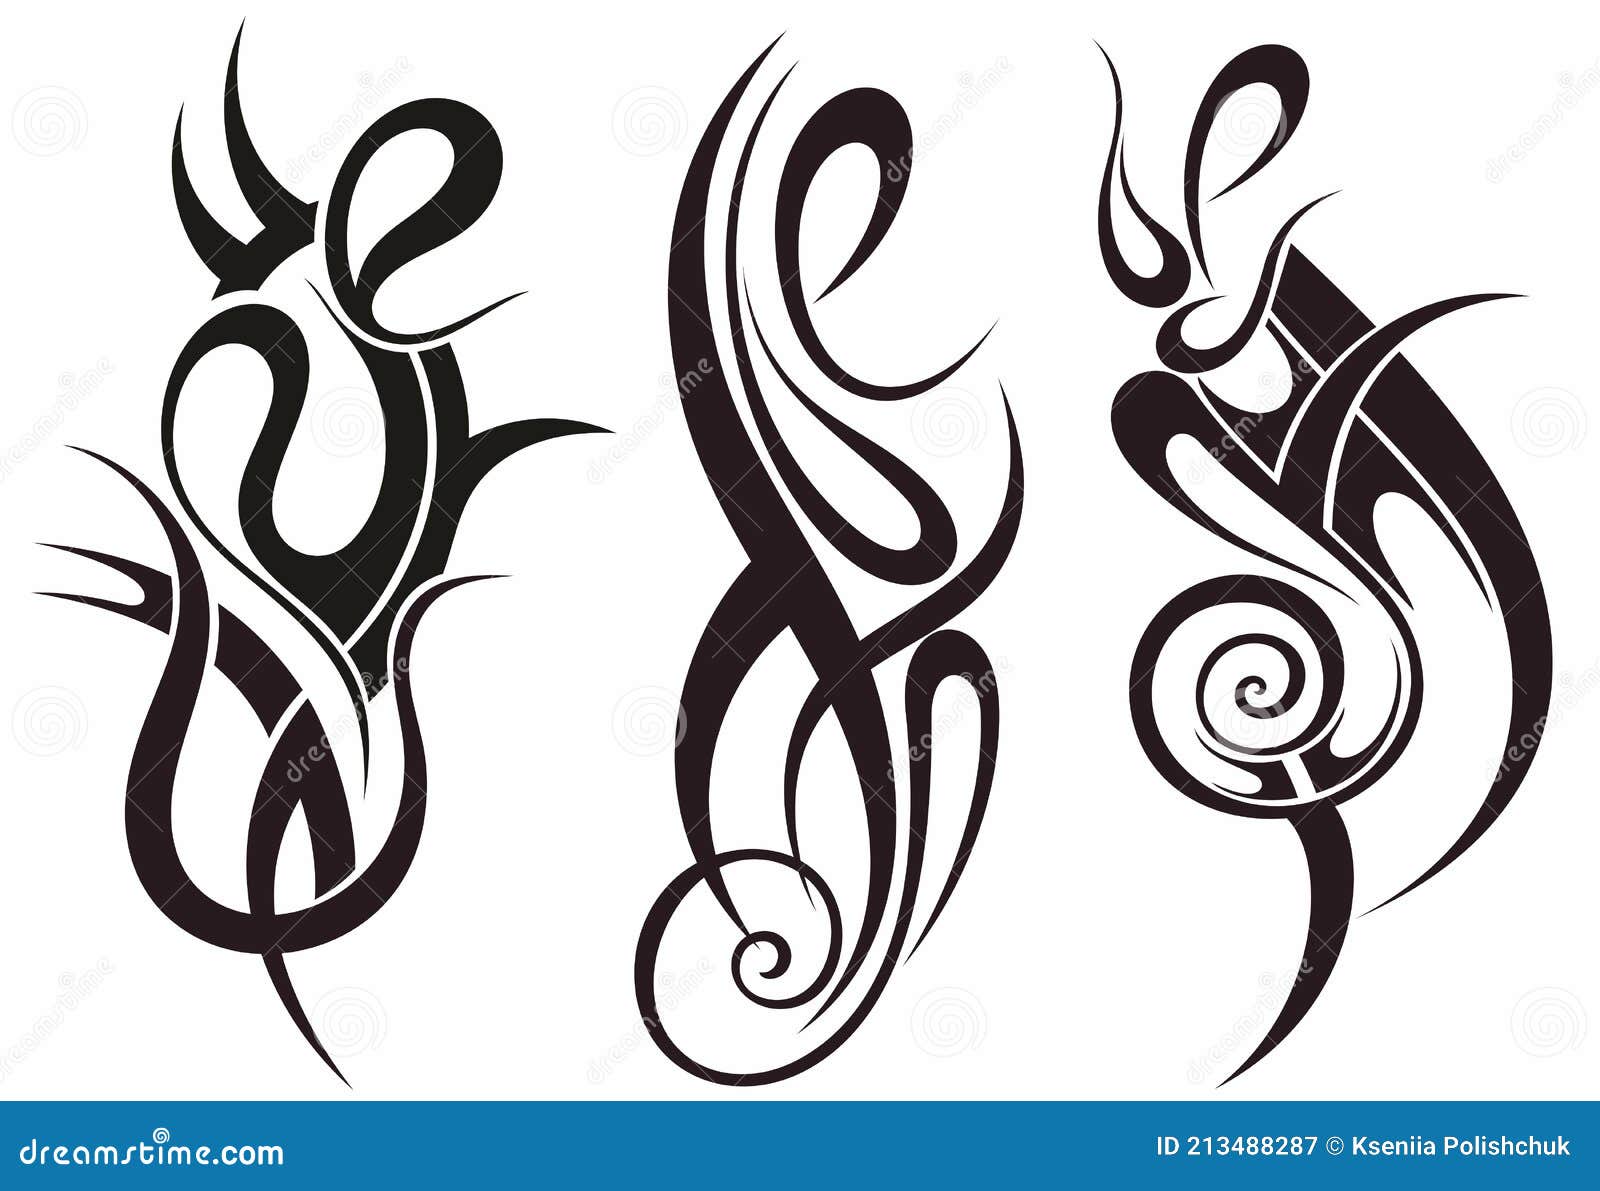 Black and White Tribal Tattoo Design Elements Set. Vector Illuctration  Stock Vector - Illustration of artistic, ornamental: 213488287